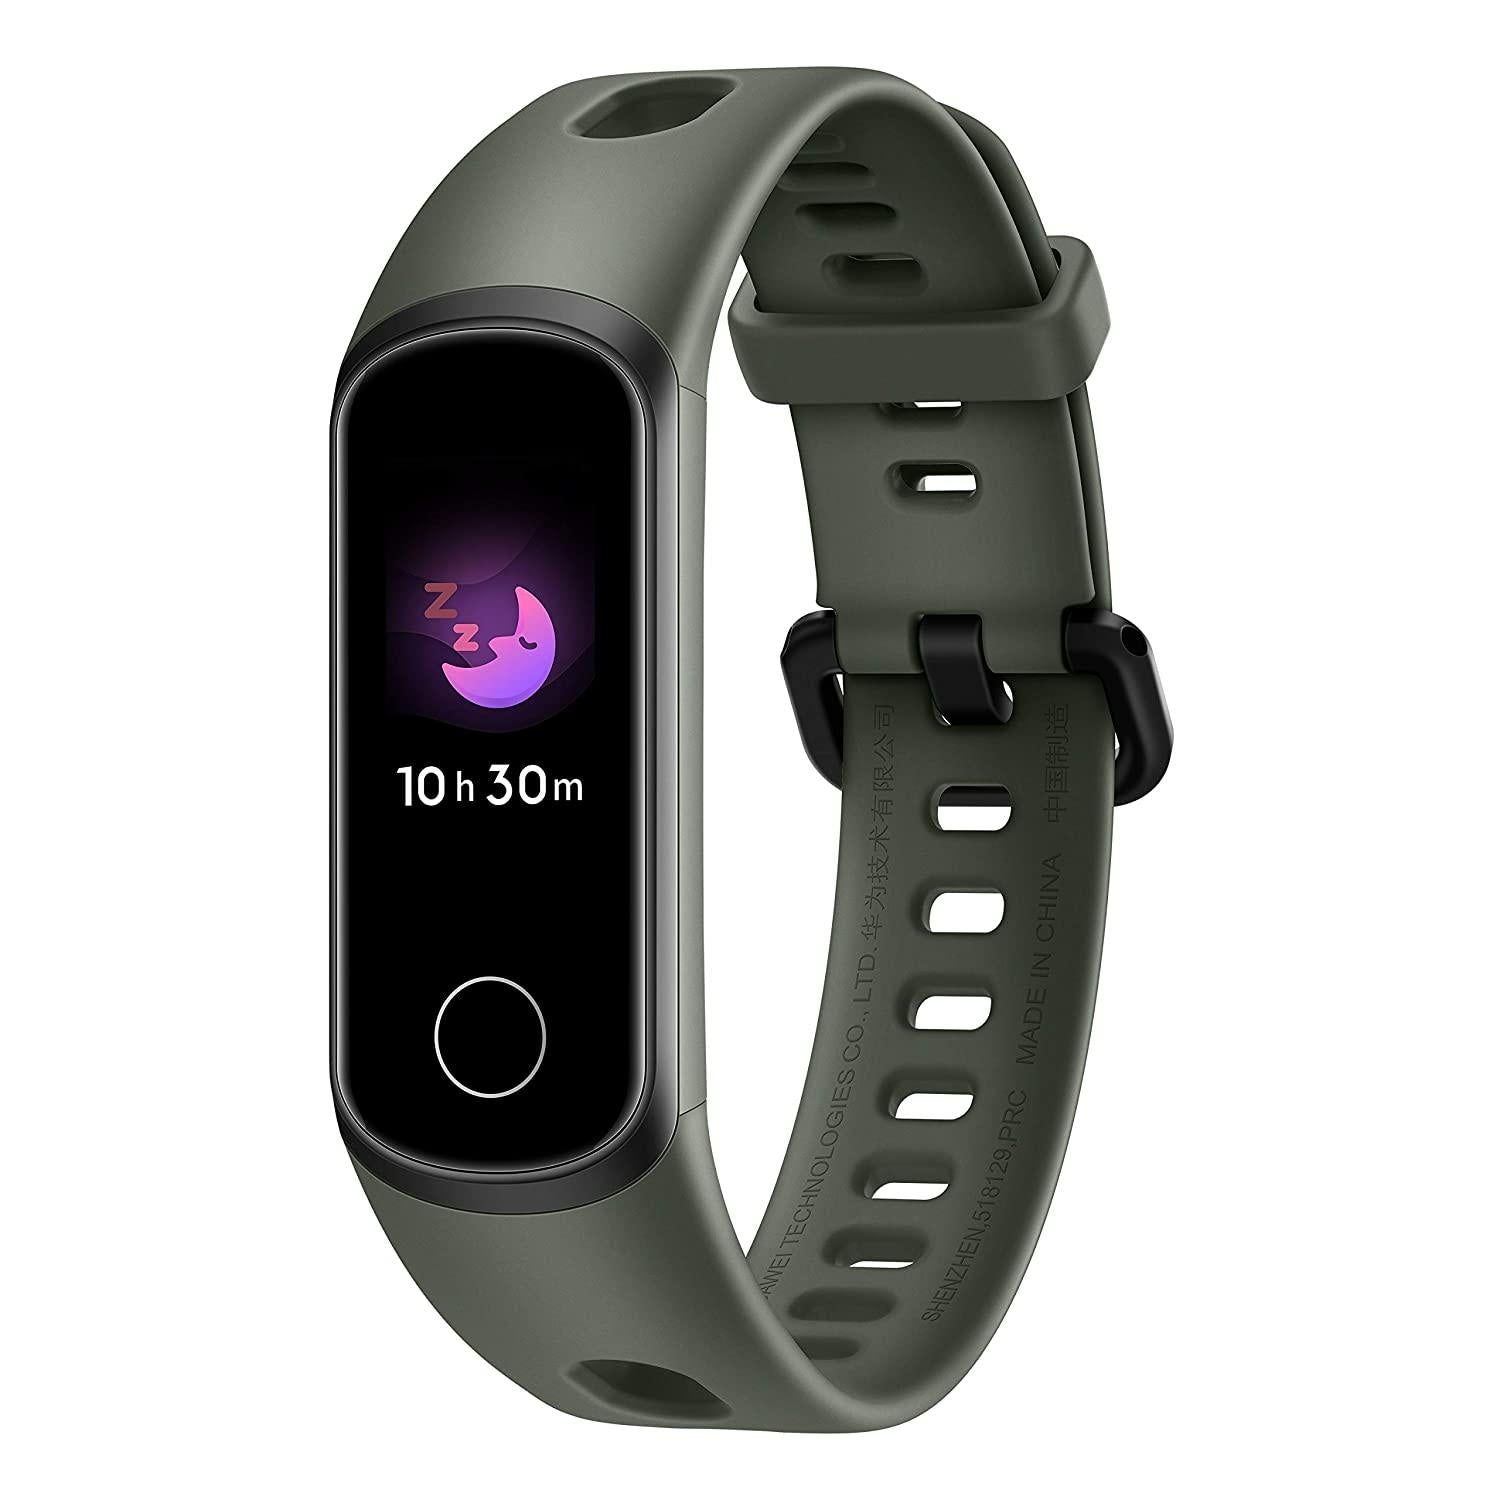 HONOR Band 5i (Olive Green) Full Color screen, SpO2, USB Charging, Music Control, Watch Faces, Multiple Sports Modes